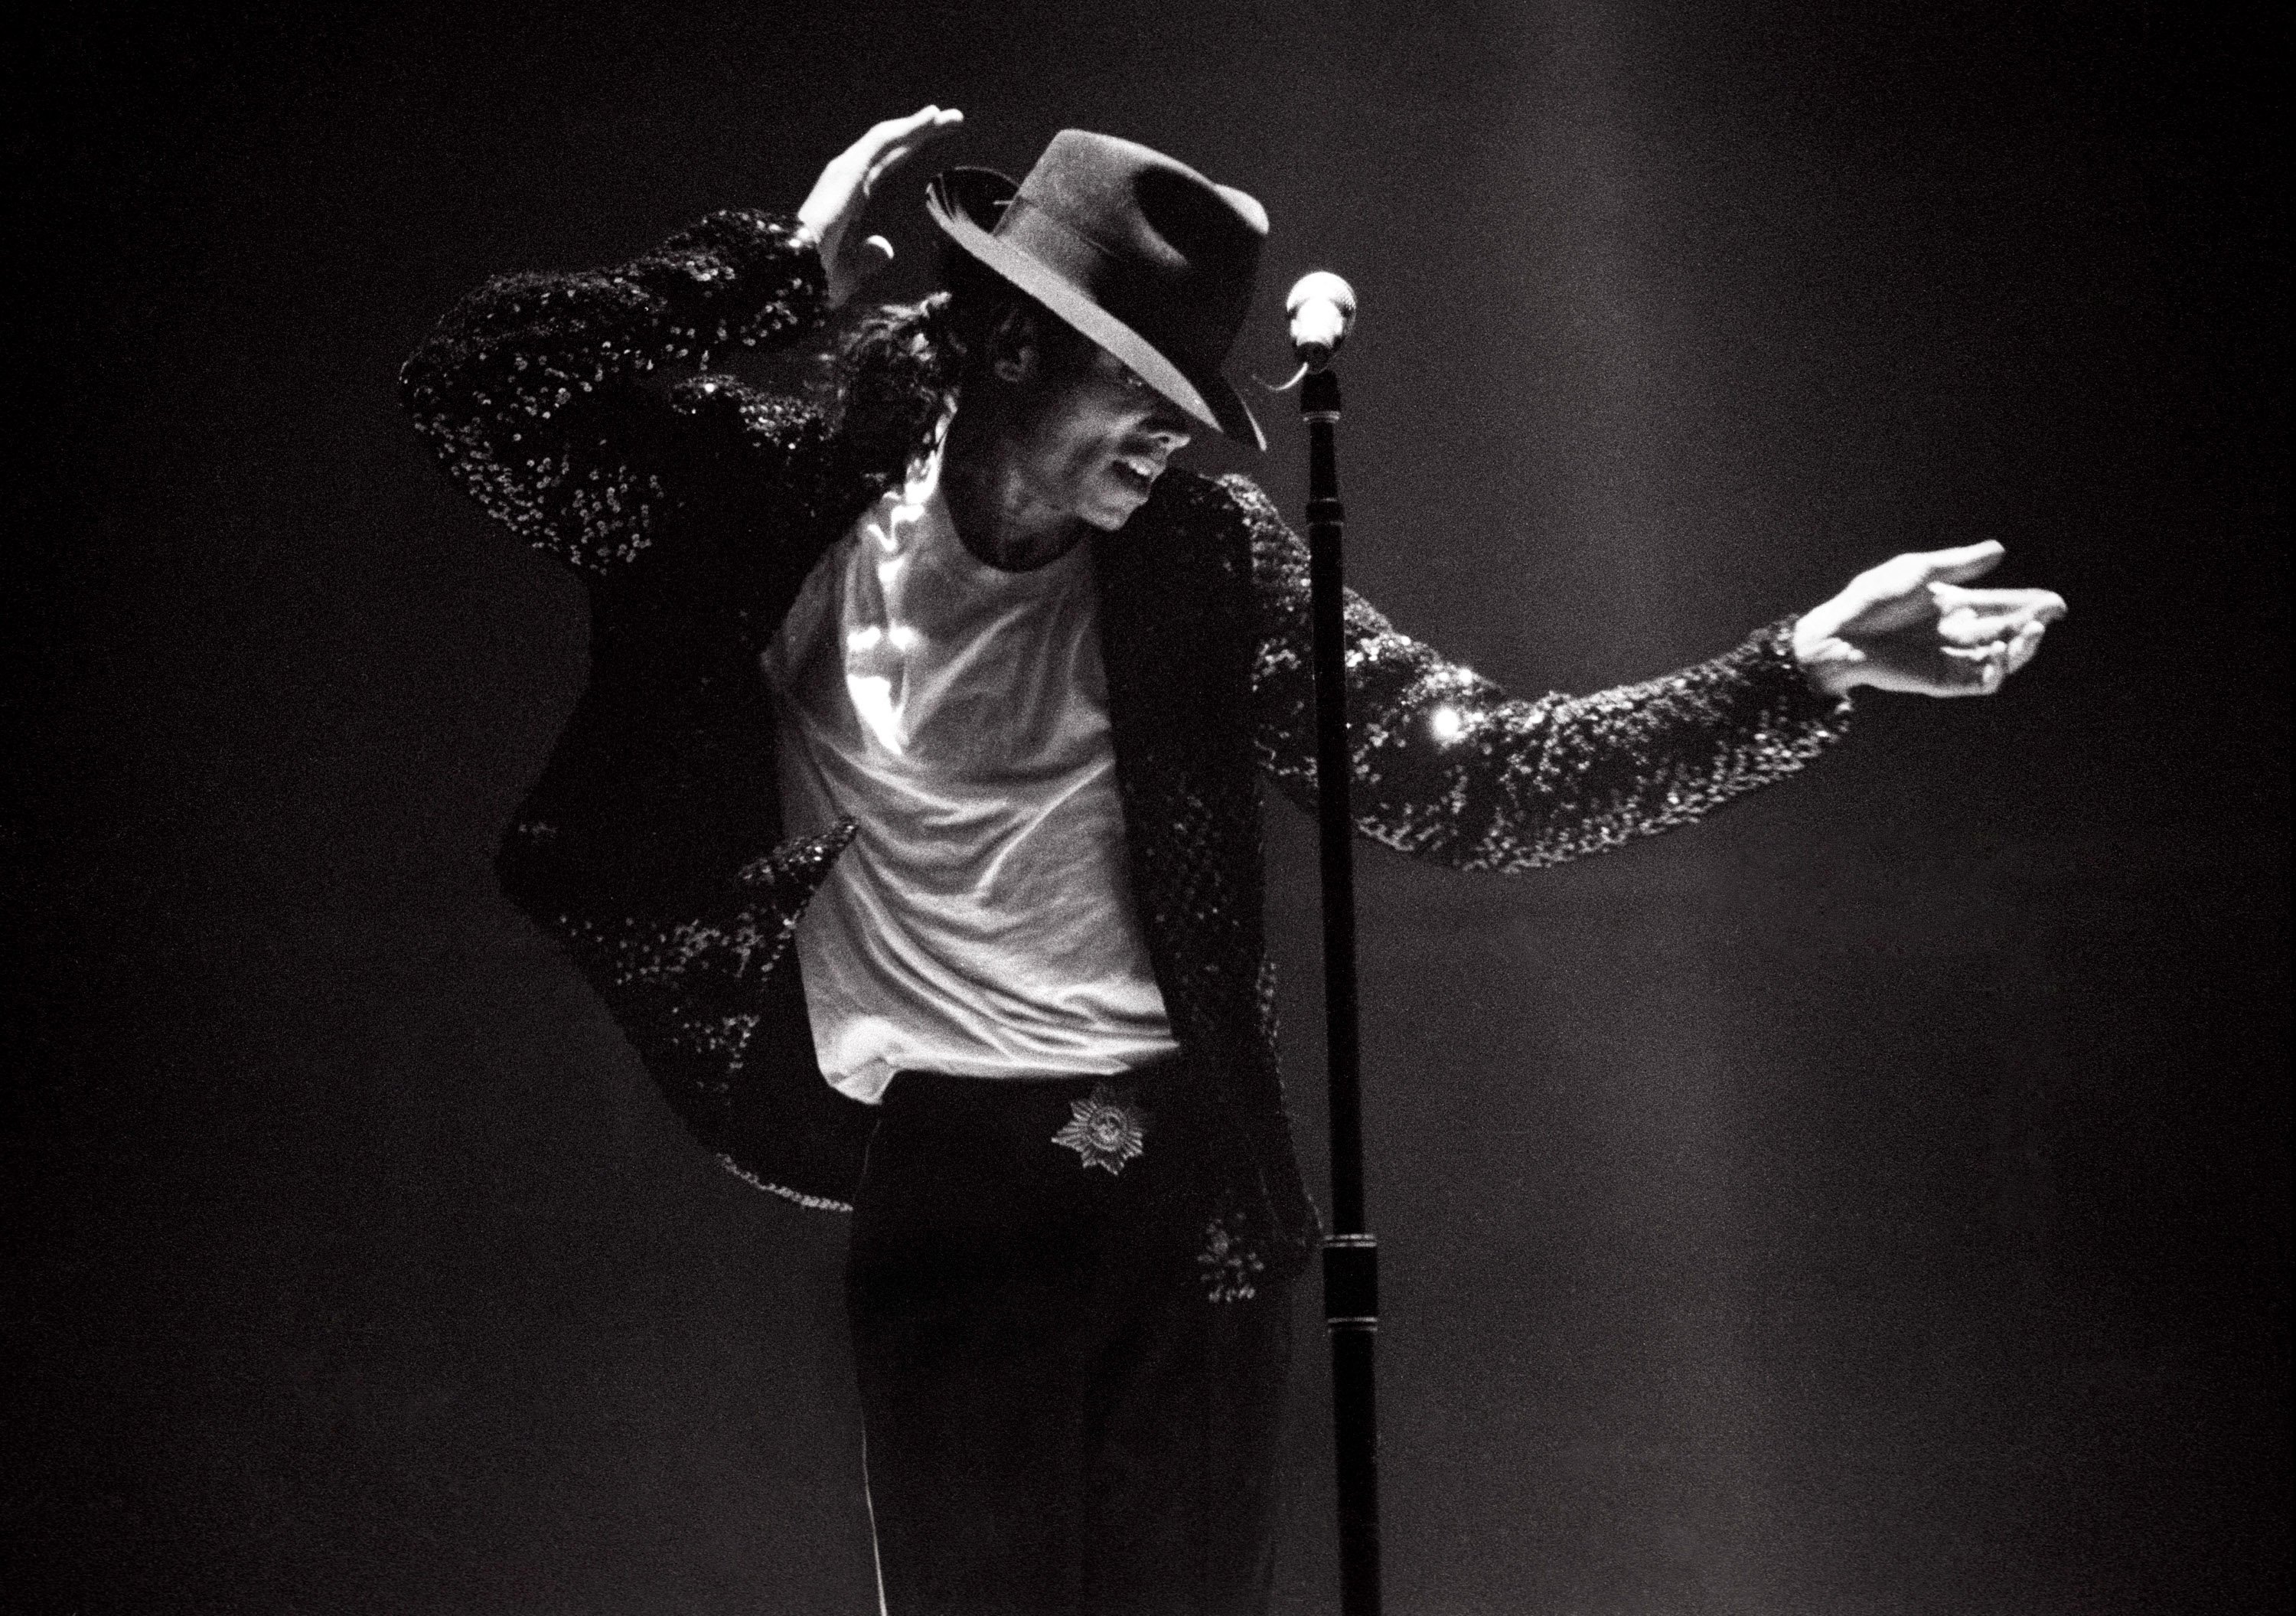 Michael Jackson wearing a fedora and a sparkly jacket while doing the moonwalk in front of a microphone